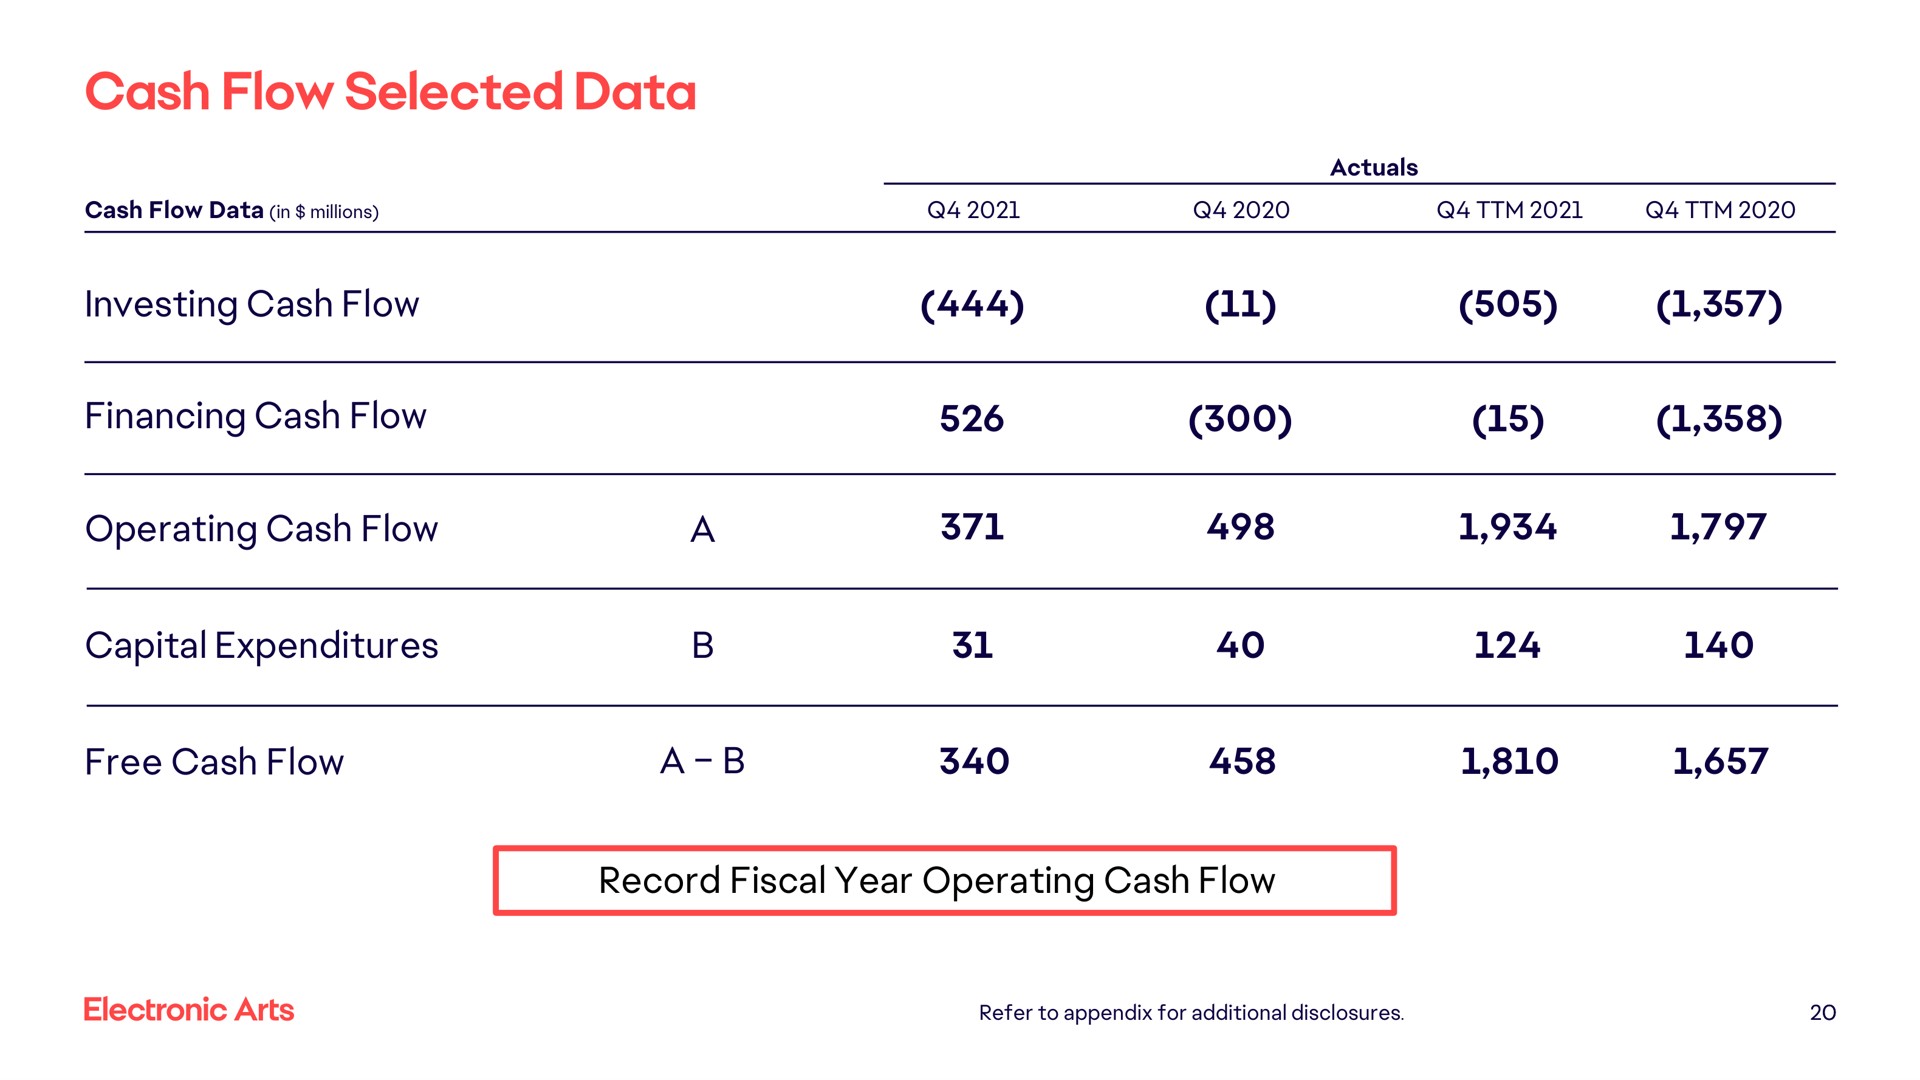 cash flow selected data investing cash flow financing cash flow operating cash flow capital expenditures a free cash flow a record fiscal year operating cash flow a | Electronic Arts